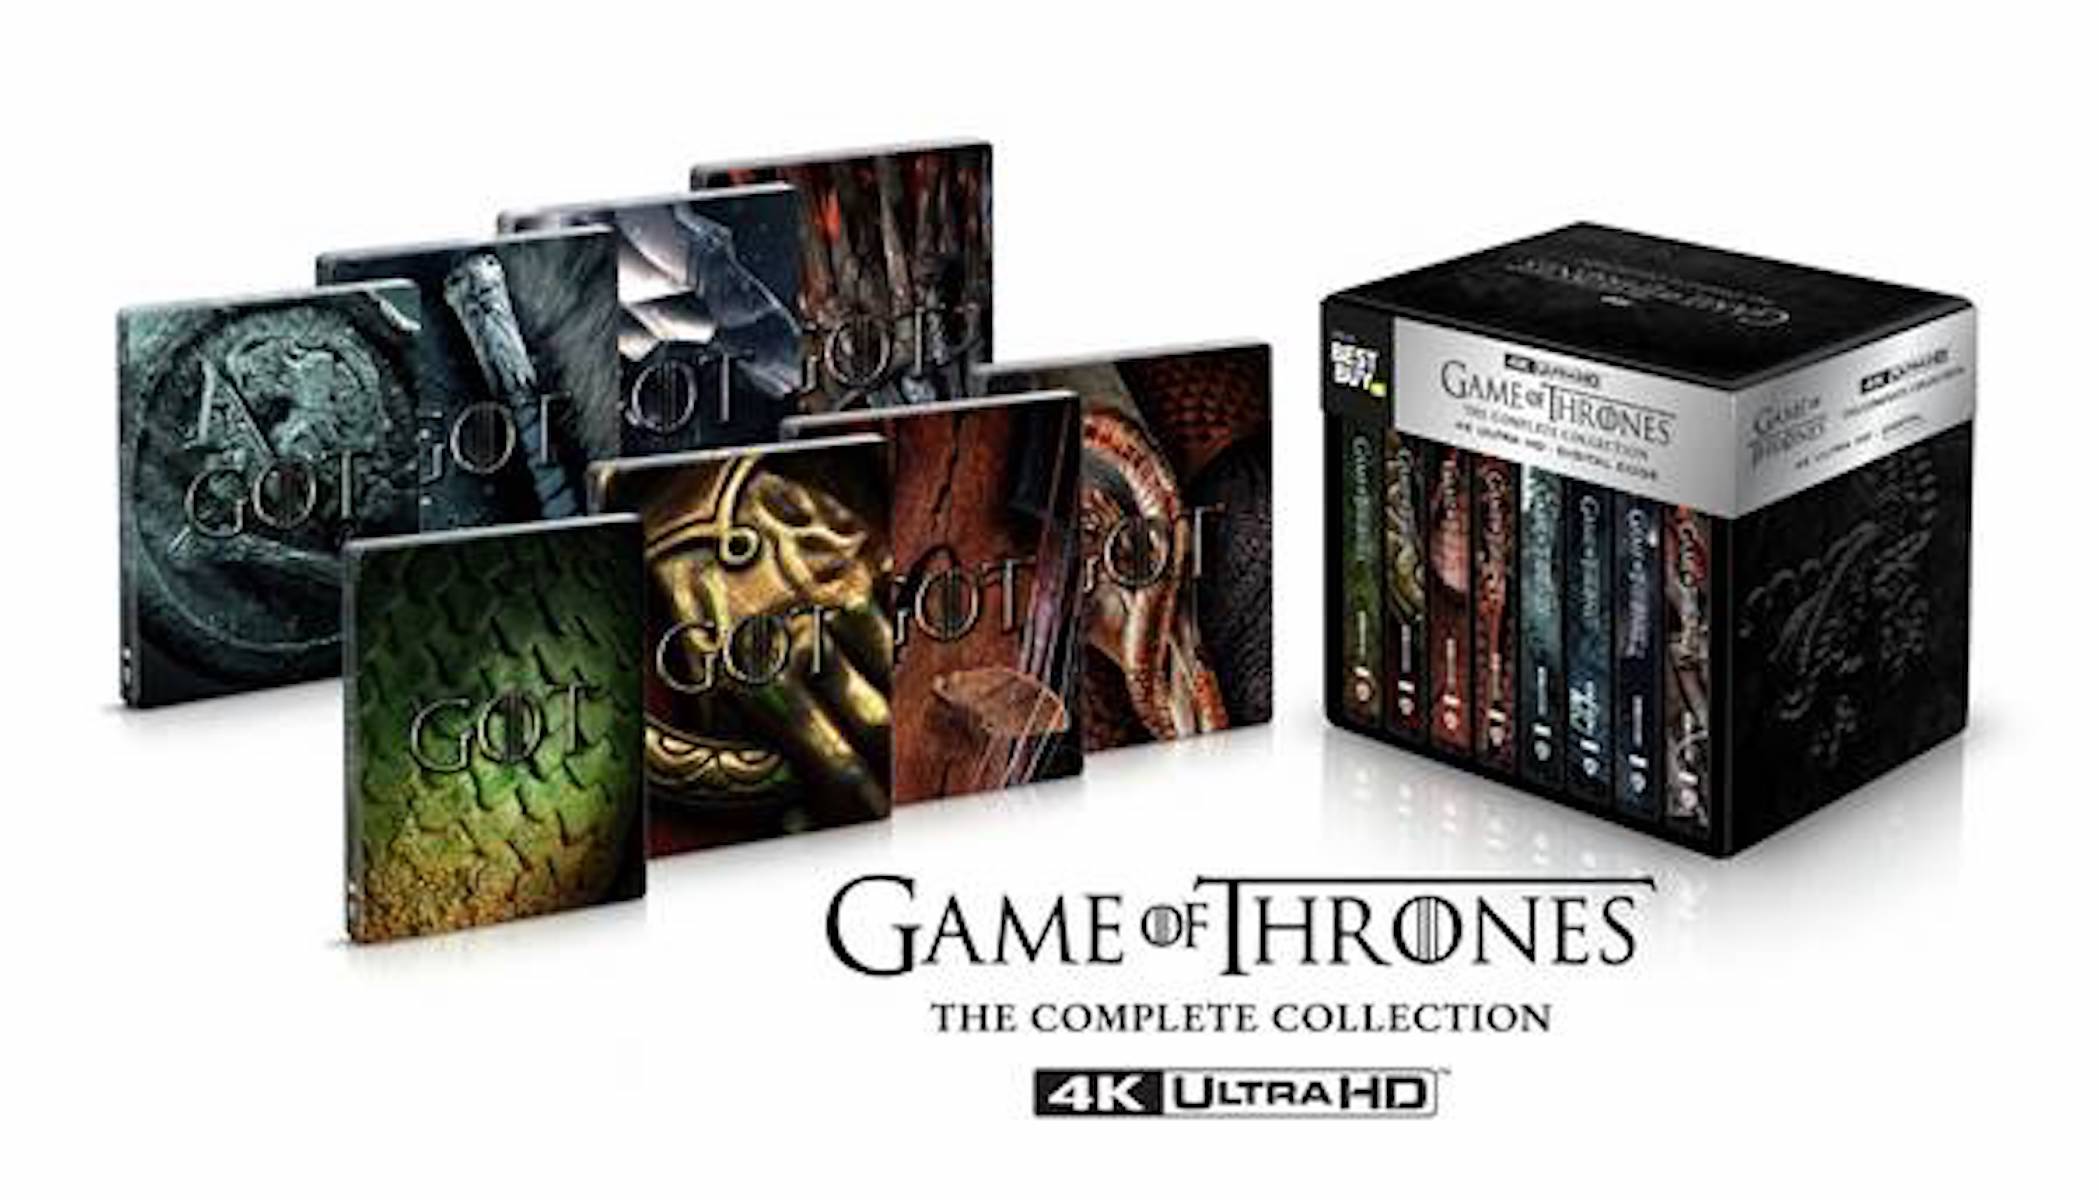 Game of Thrones: The Complete Collection